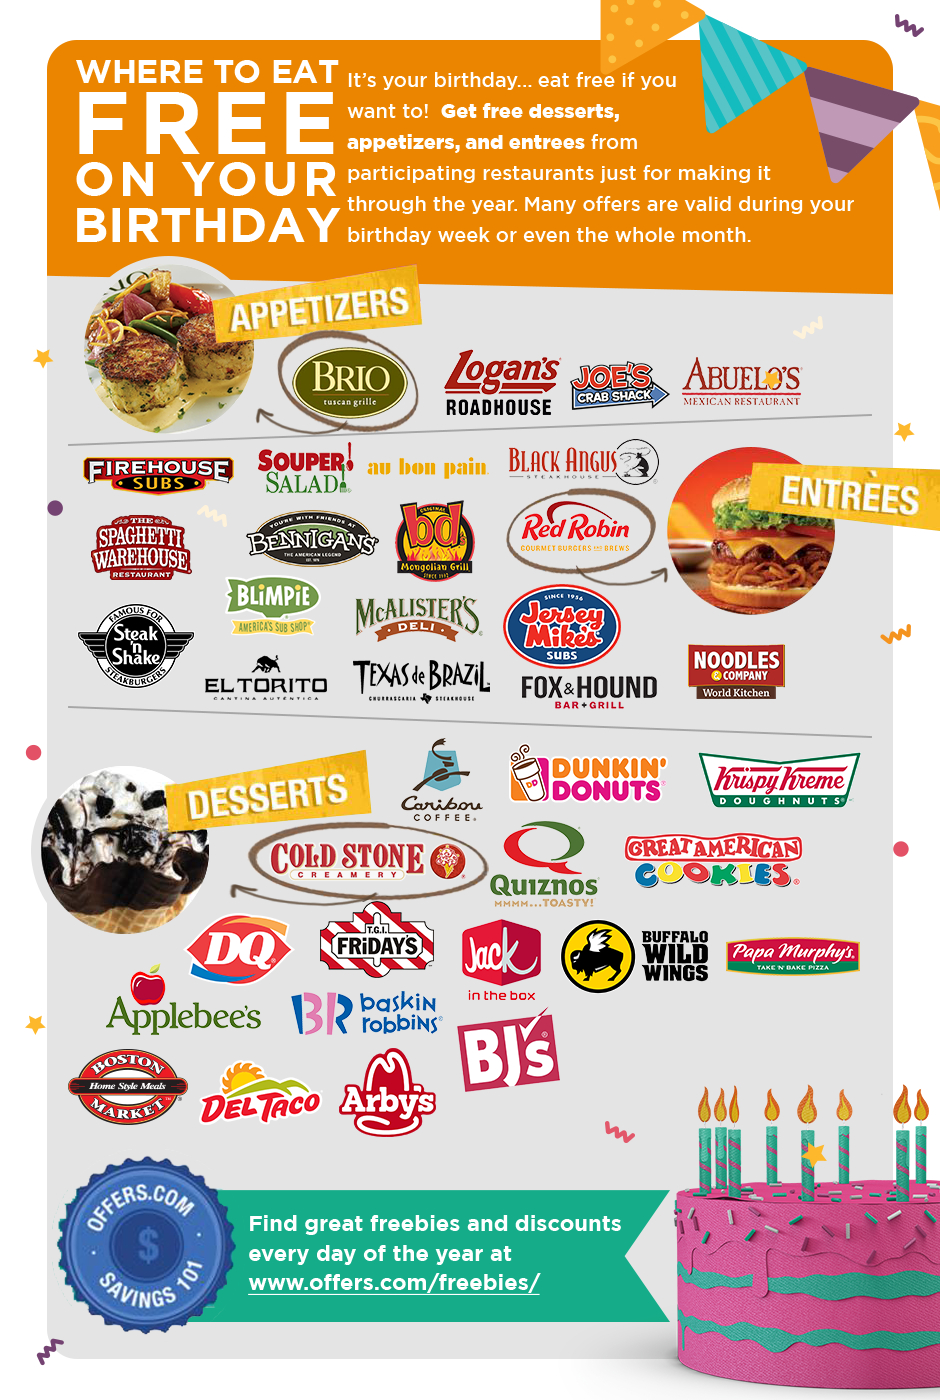 Free Birthday Meals 2019 - Restaurant W/ Free Food On Your Birthday - Texas Roadhouse Printable Coupons Free Appetizer